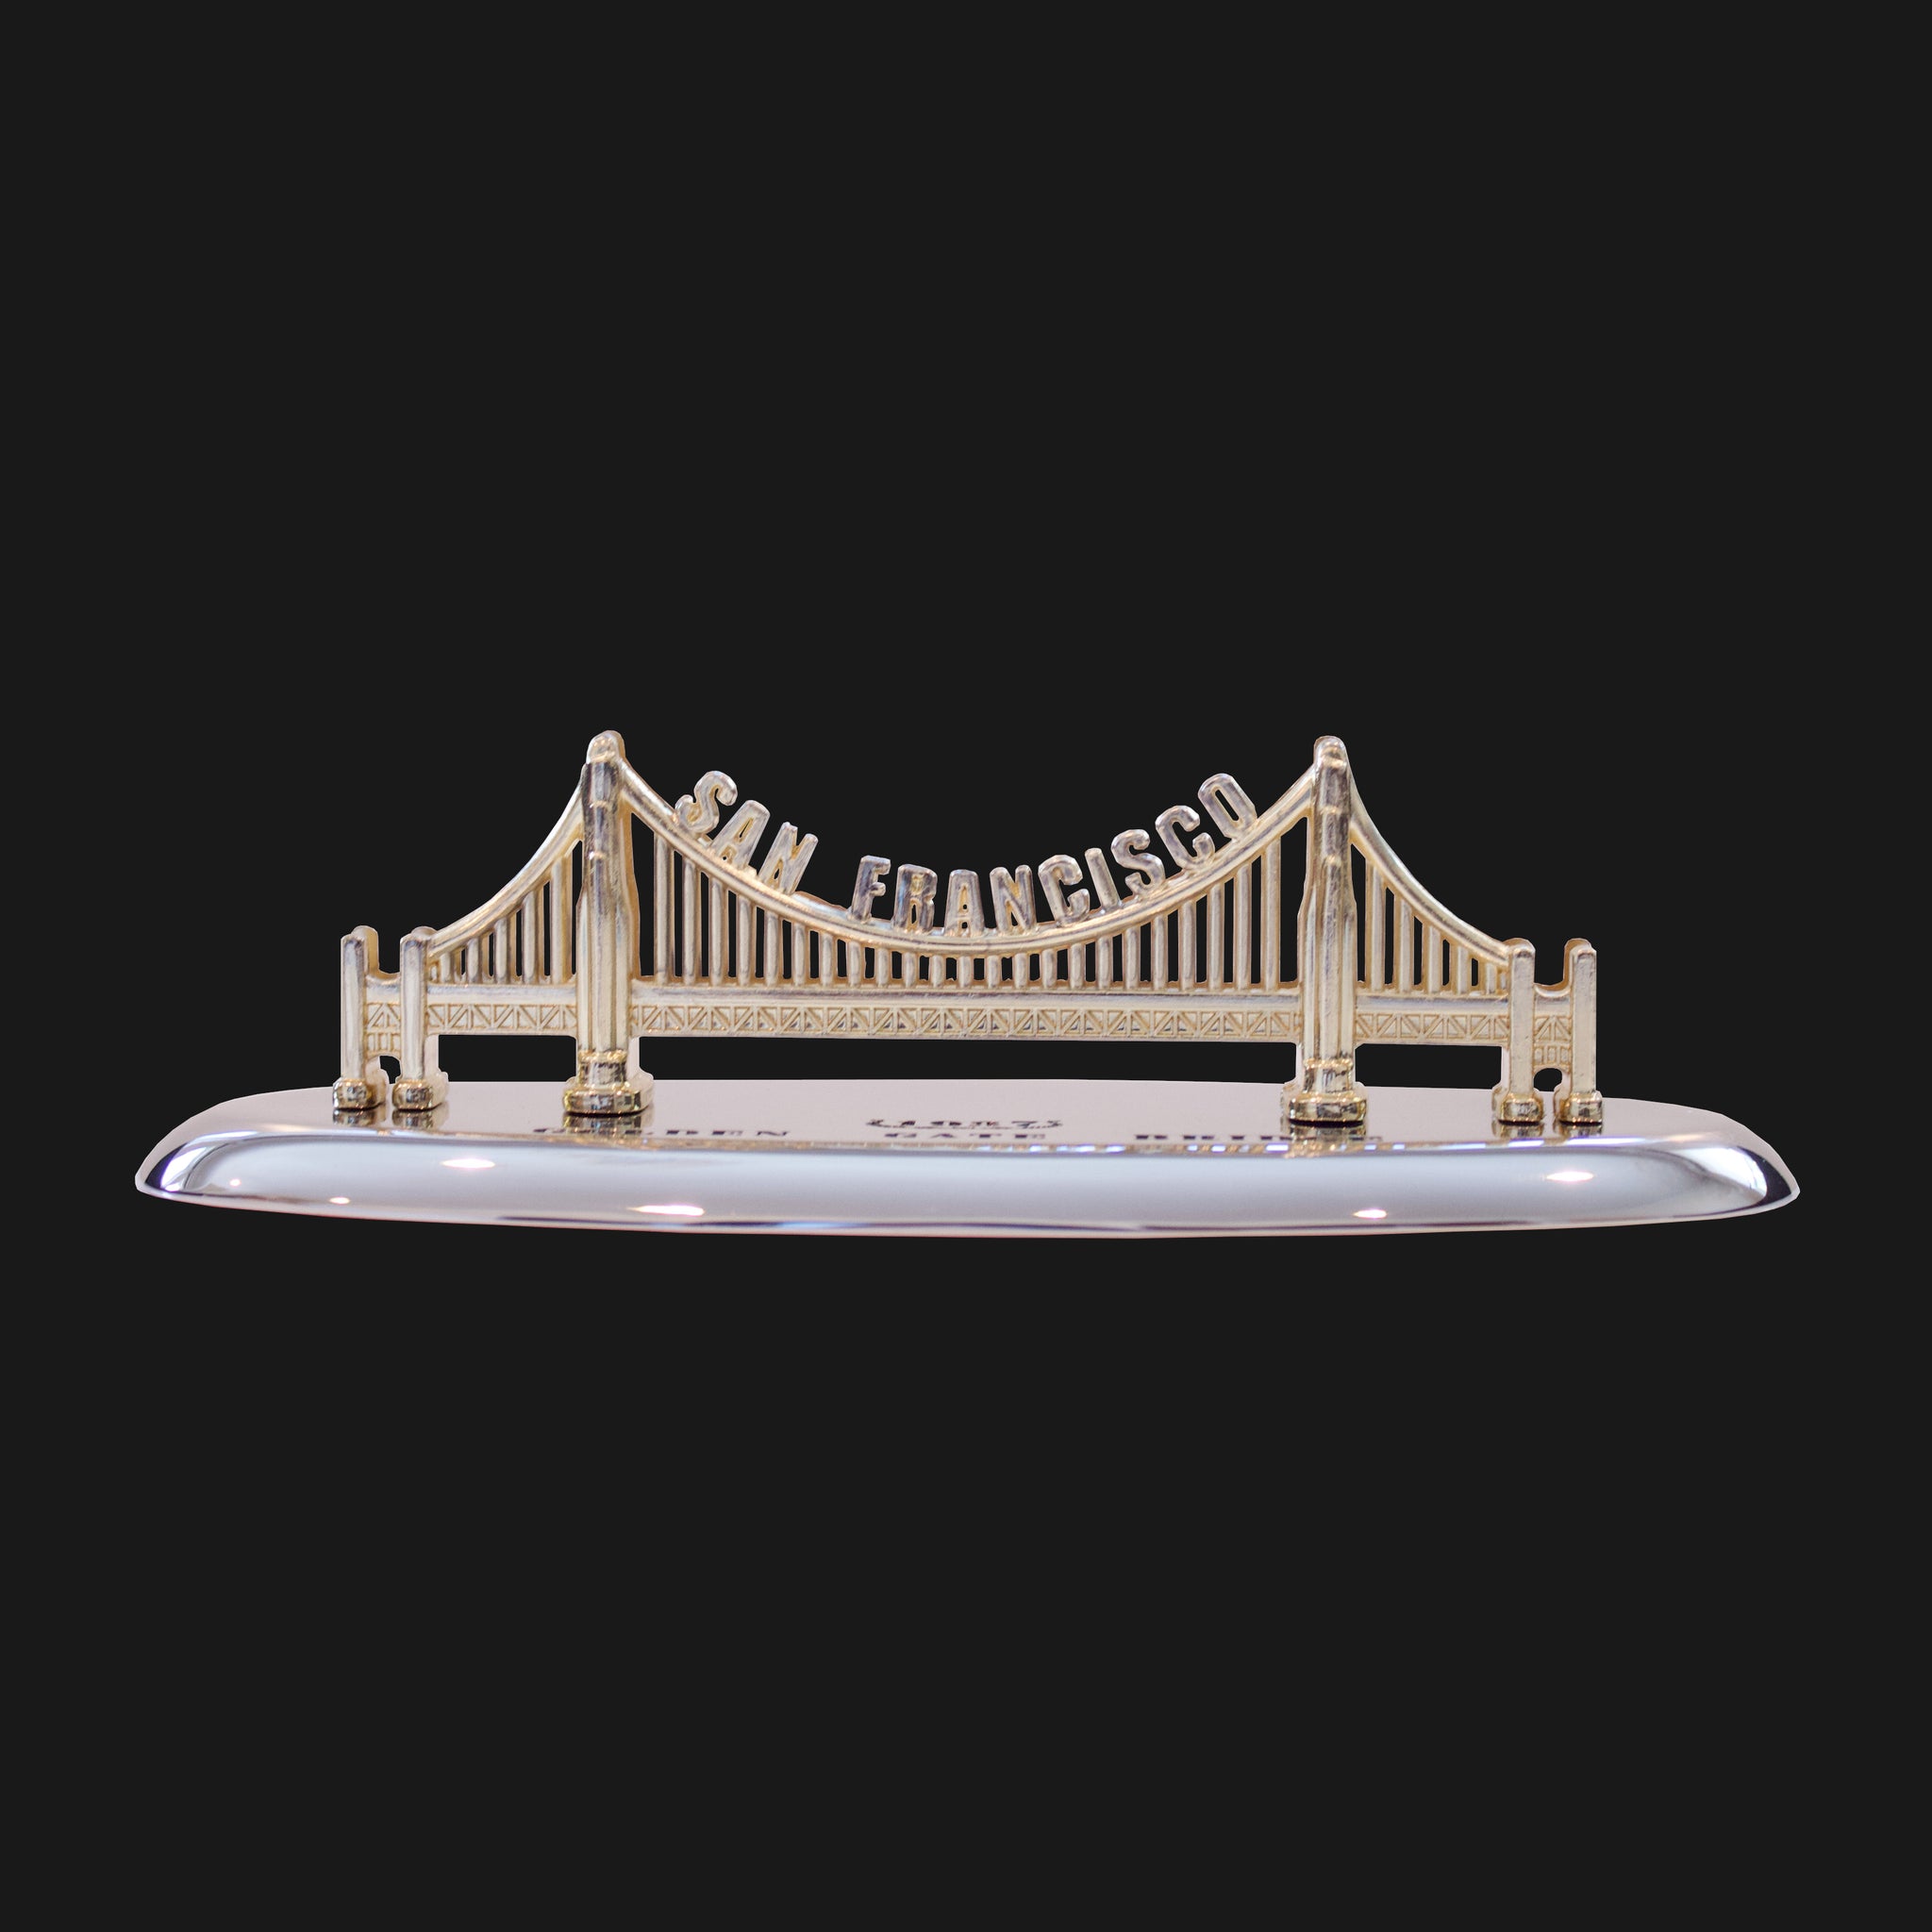 A gold color model of the Golden Gate Bridge on a stand.